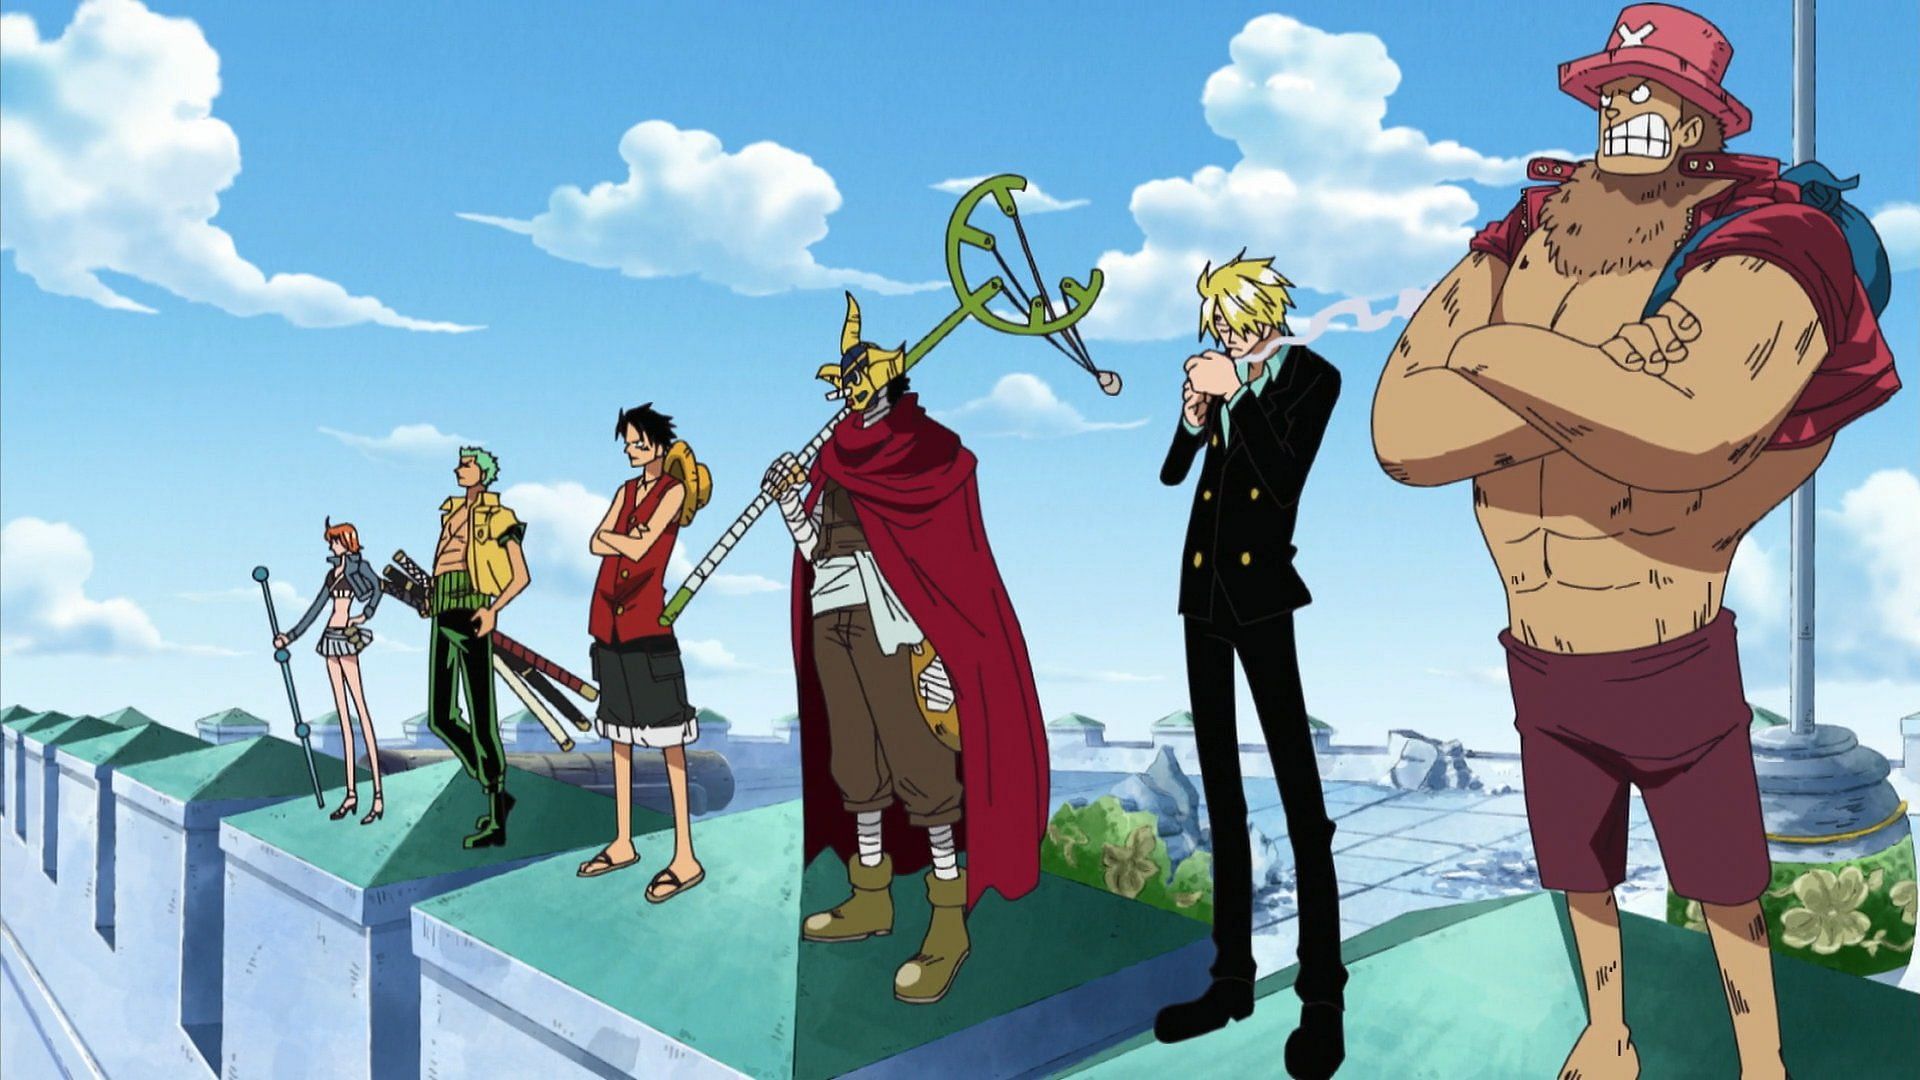 One Piece Special Edition (HD, Subtitled): Sky Island (136-206